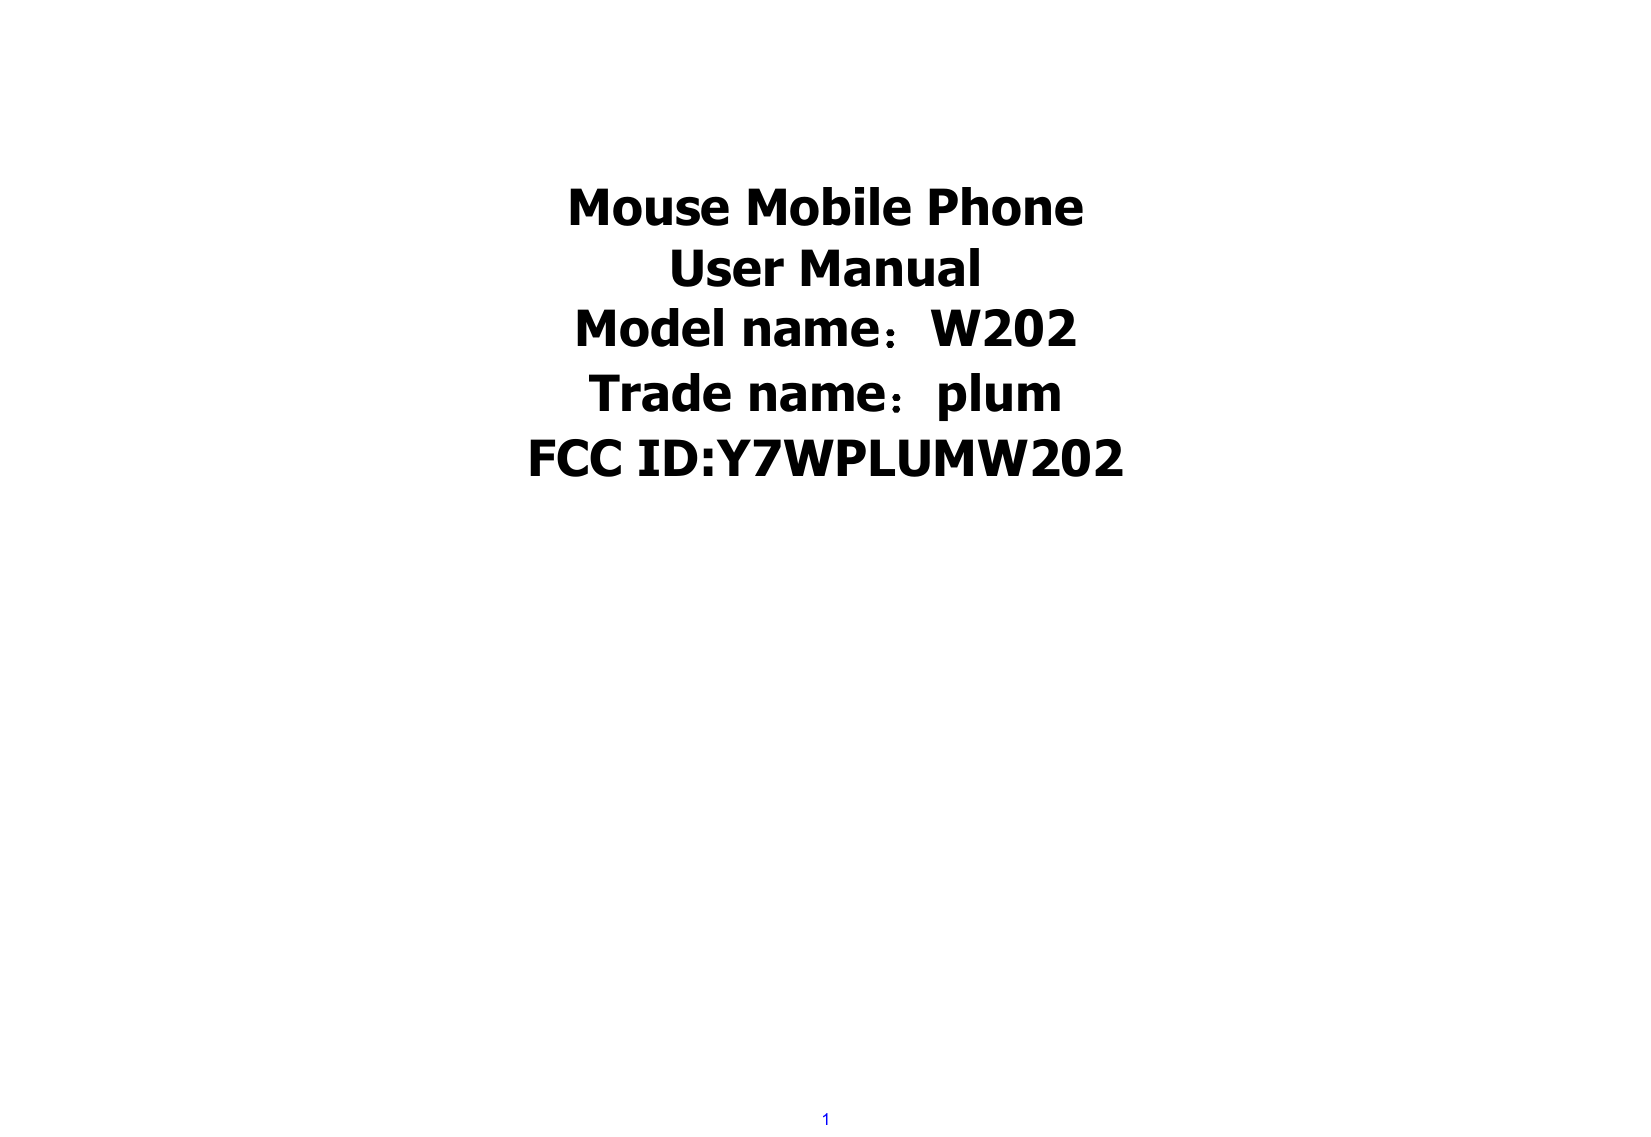  1   Mouse Mobile Phone User Manual Model name：W202 Trade name：plum FCC ID:Y7WPLUMW202 